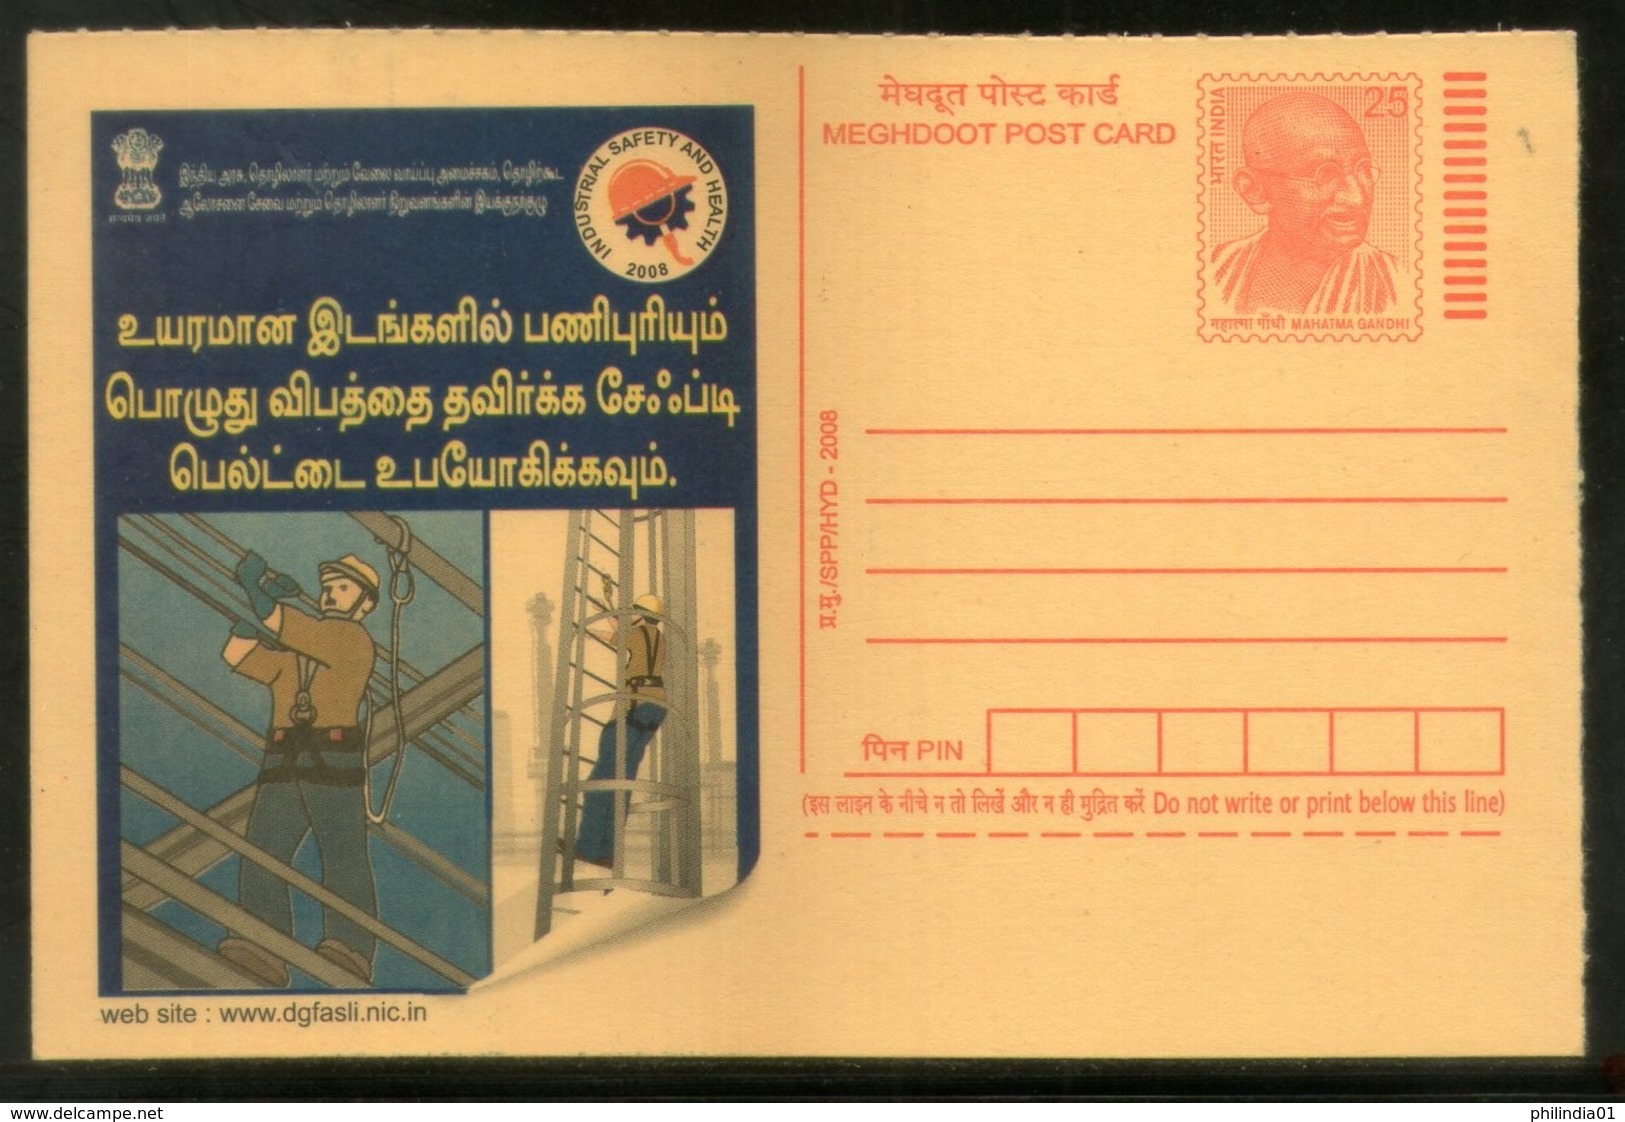 India 2008 "Use Safety Belts On High" Industrial Safety & Health Job Tamil Advert Gandhi Post Card # 504 - Accidents & Sécurité Routière